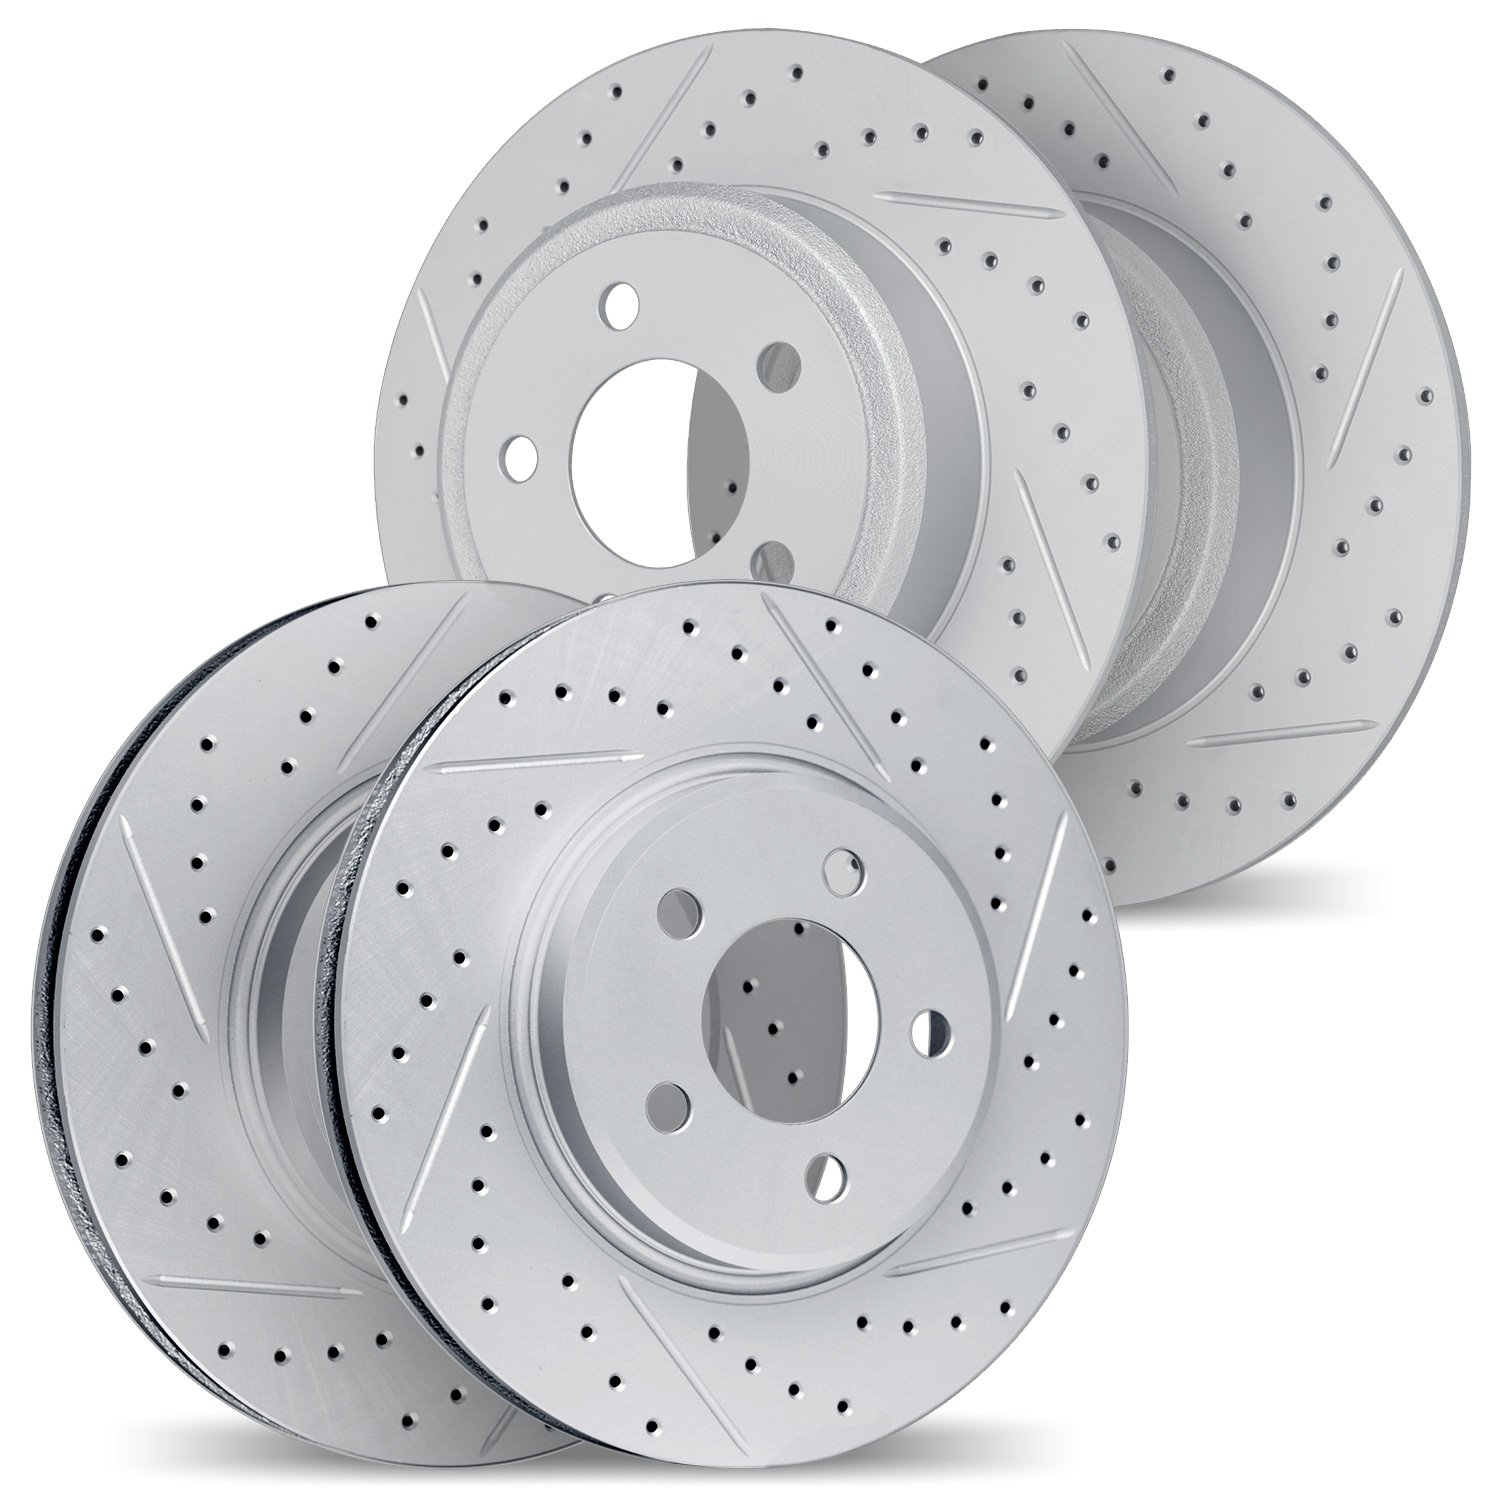 2004-54072 Geoperformance Drilled/Slotted Brake Rotors, 2006-2010 Ford/Lincoln/Mercury/Mazda, Position: Front and Rear